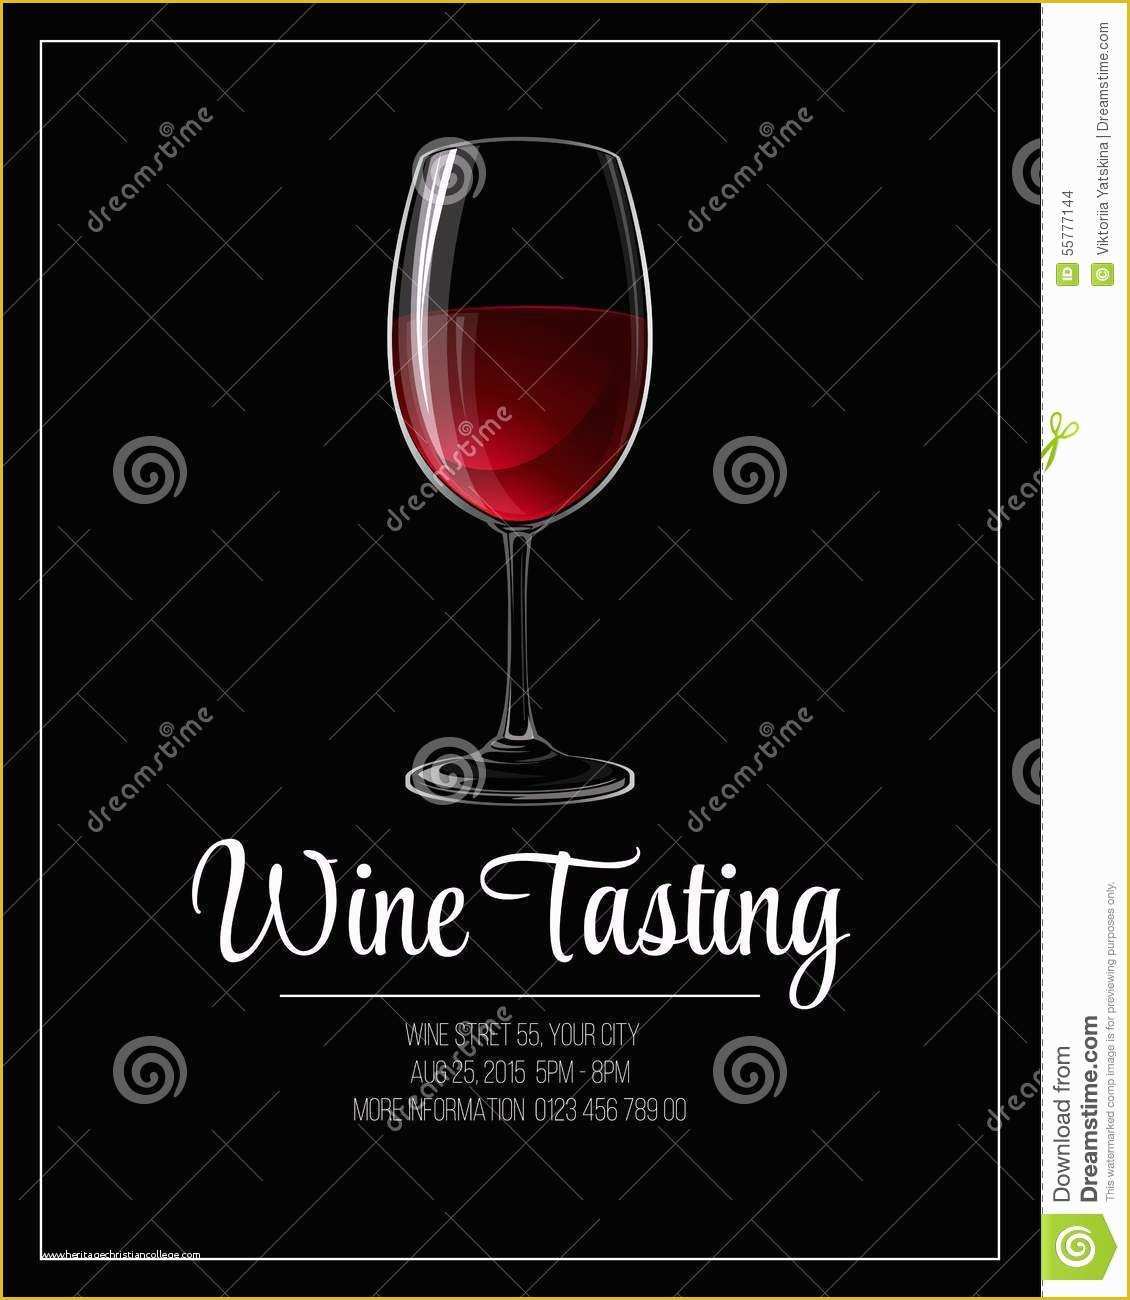 Wine Tasting event Flyer Template Free Of Wine Tasting Flyer Template Vector Illustration Stock